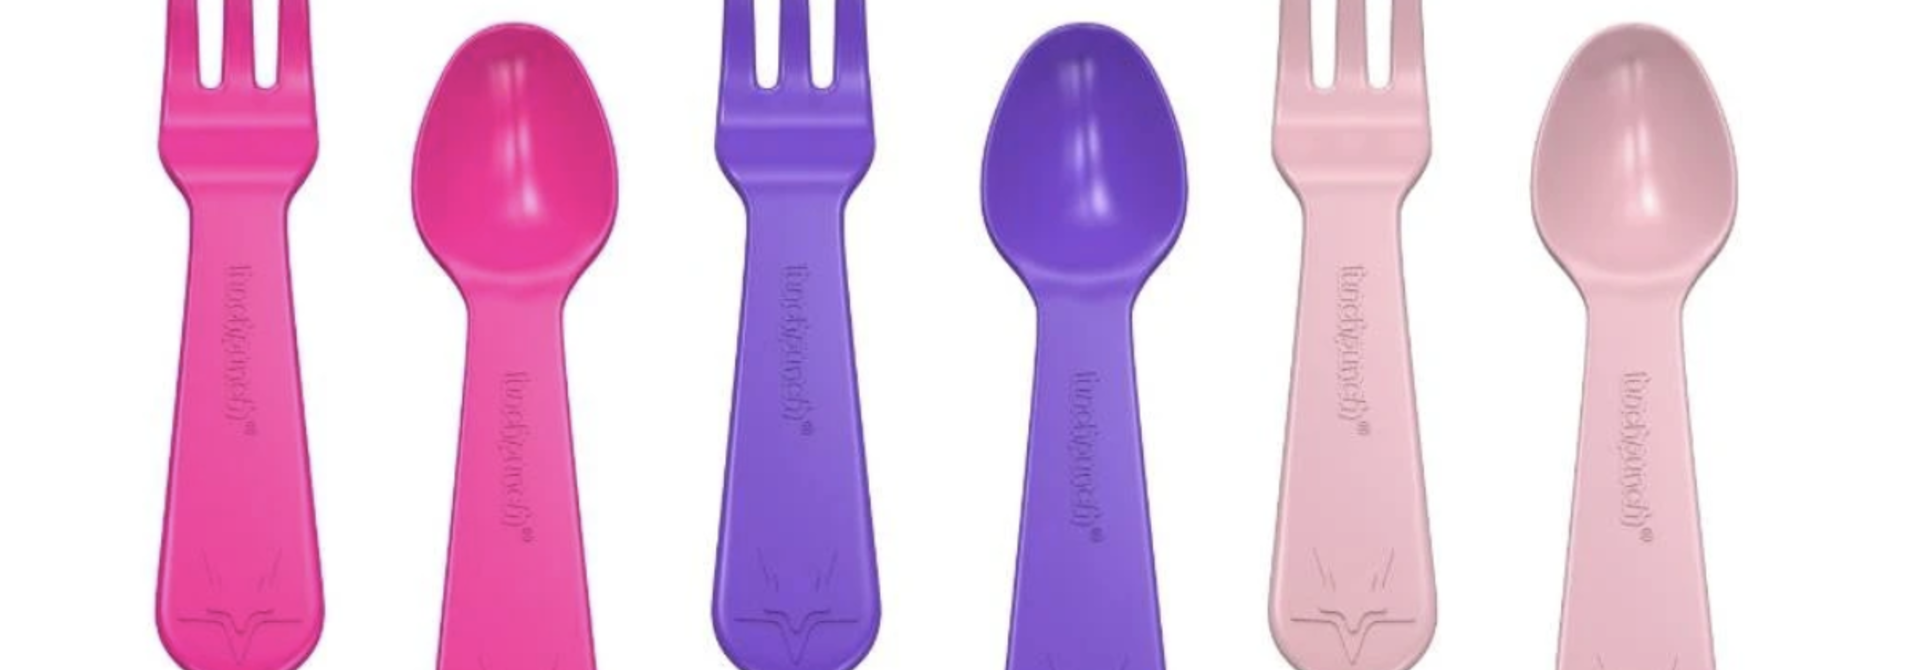 Lunch Punch Fork and Spoon - Pink